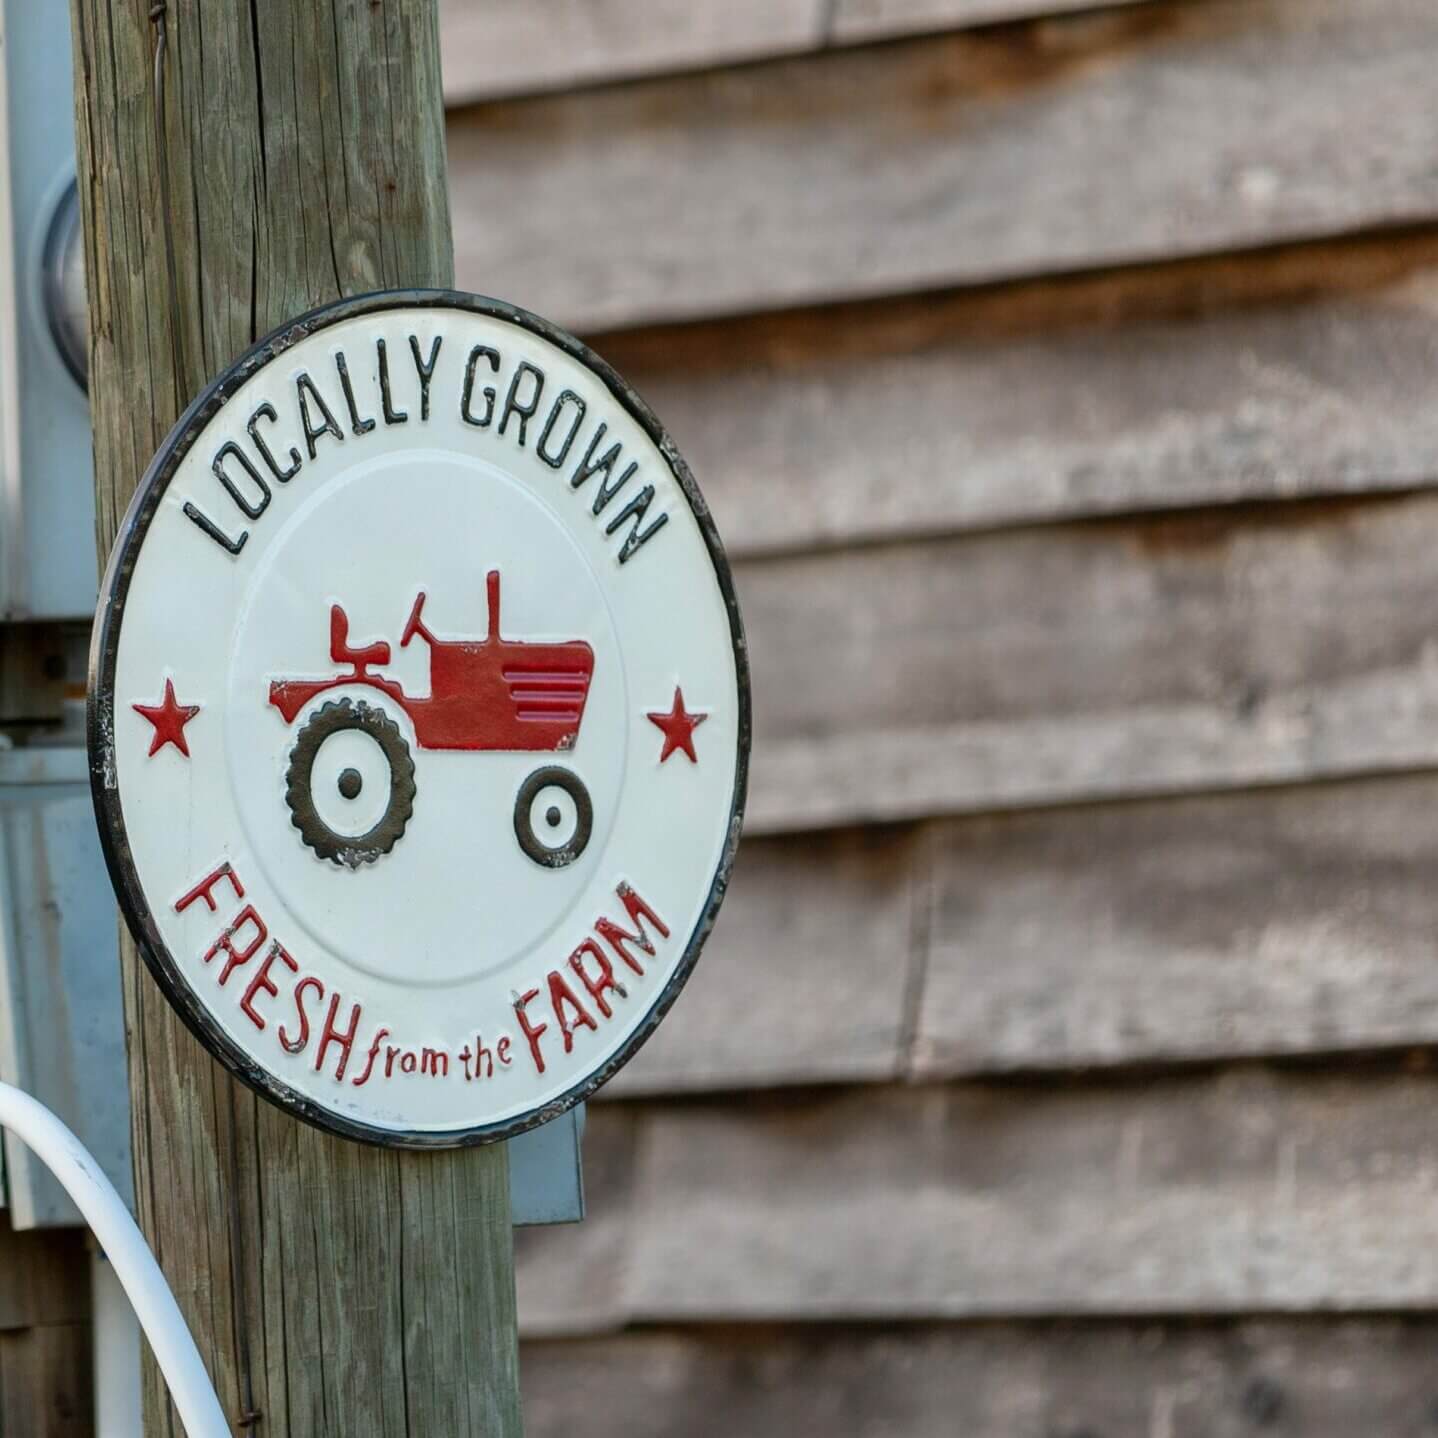 locally grown fresh from the farm sign